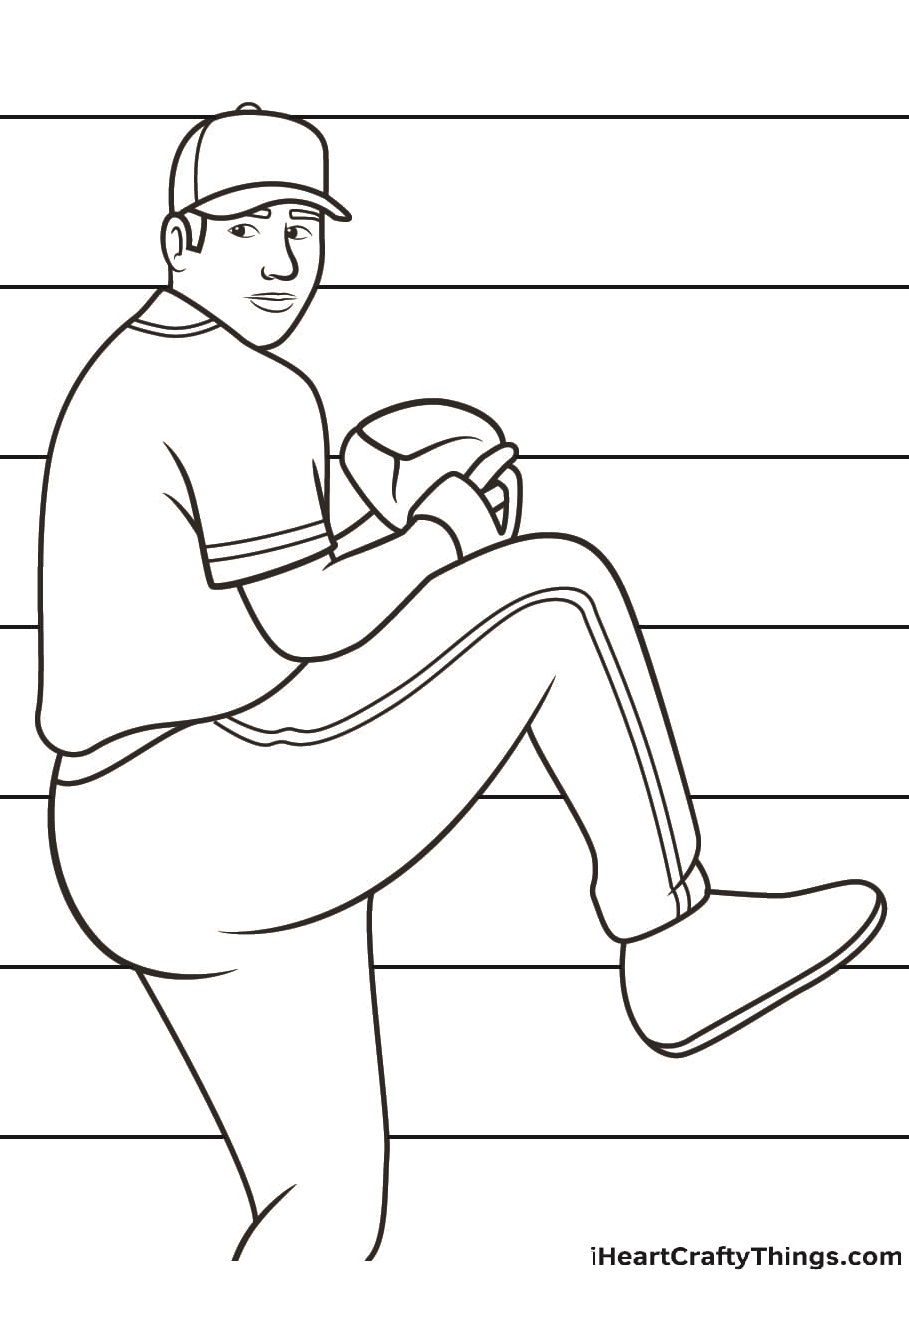 Baseball For Kids Image Coloring Page